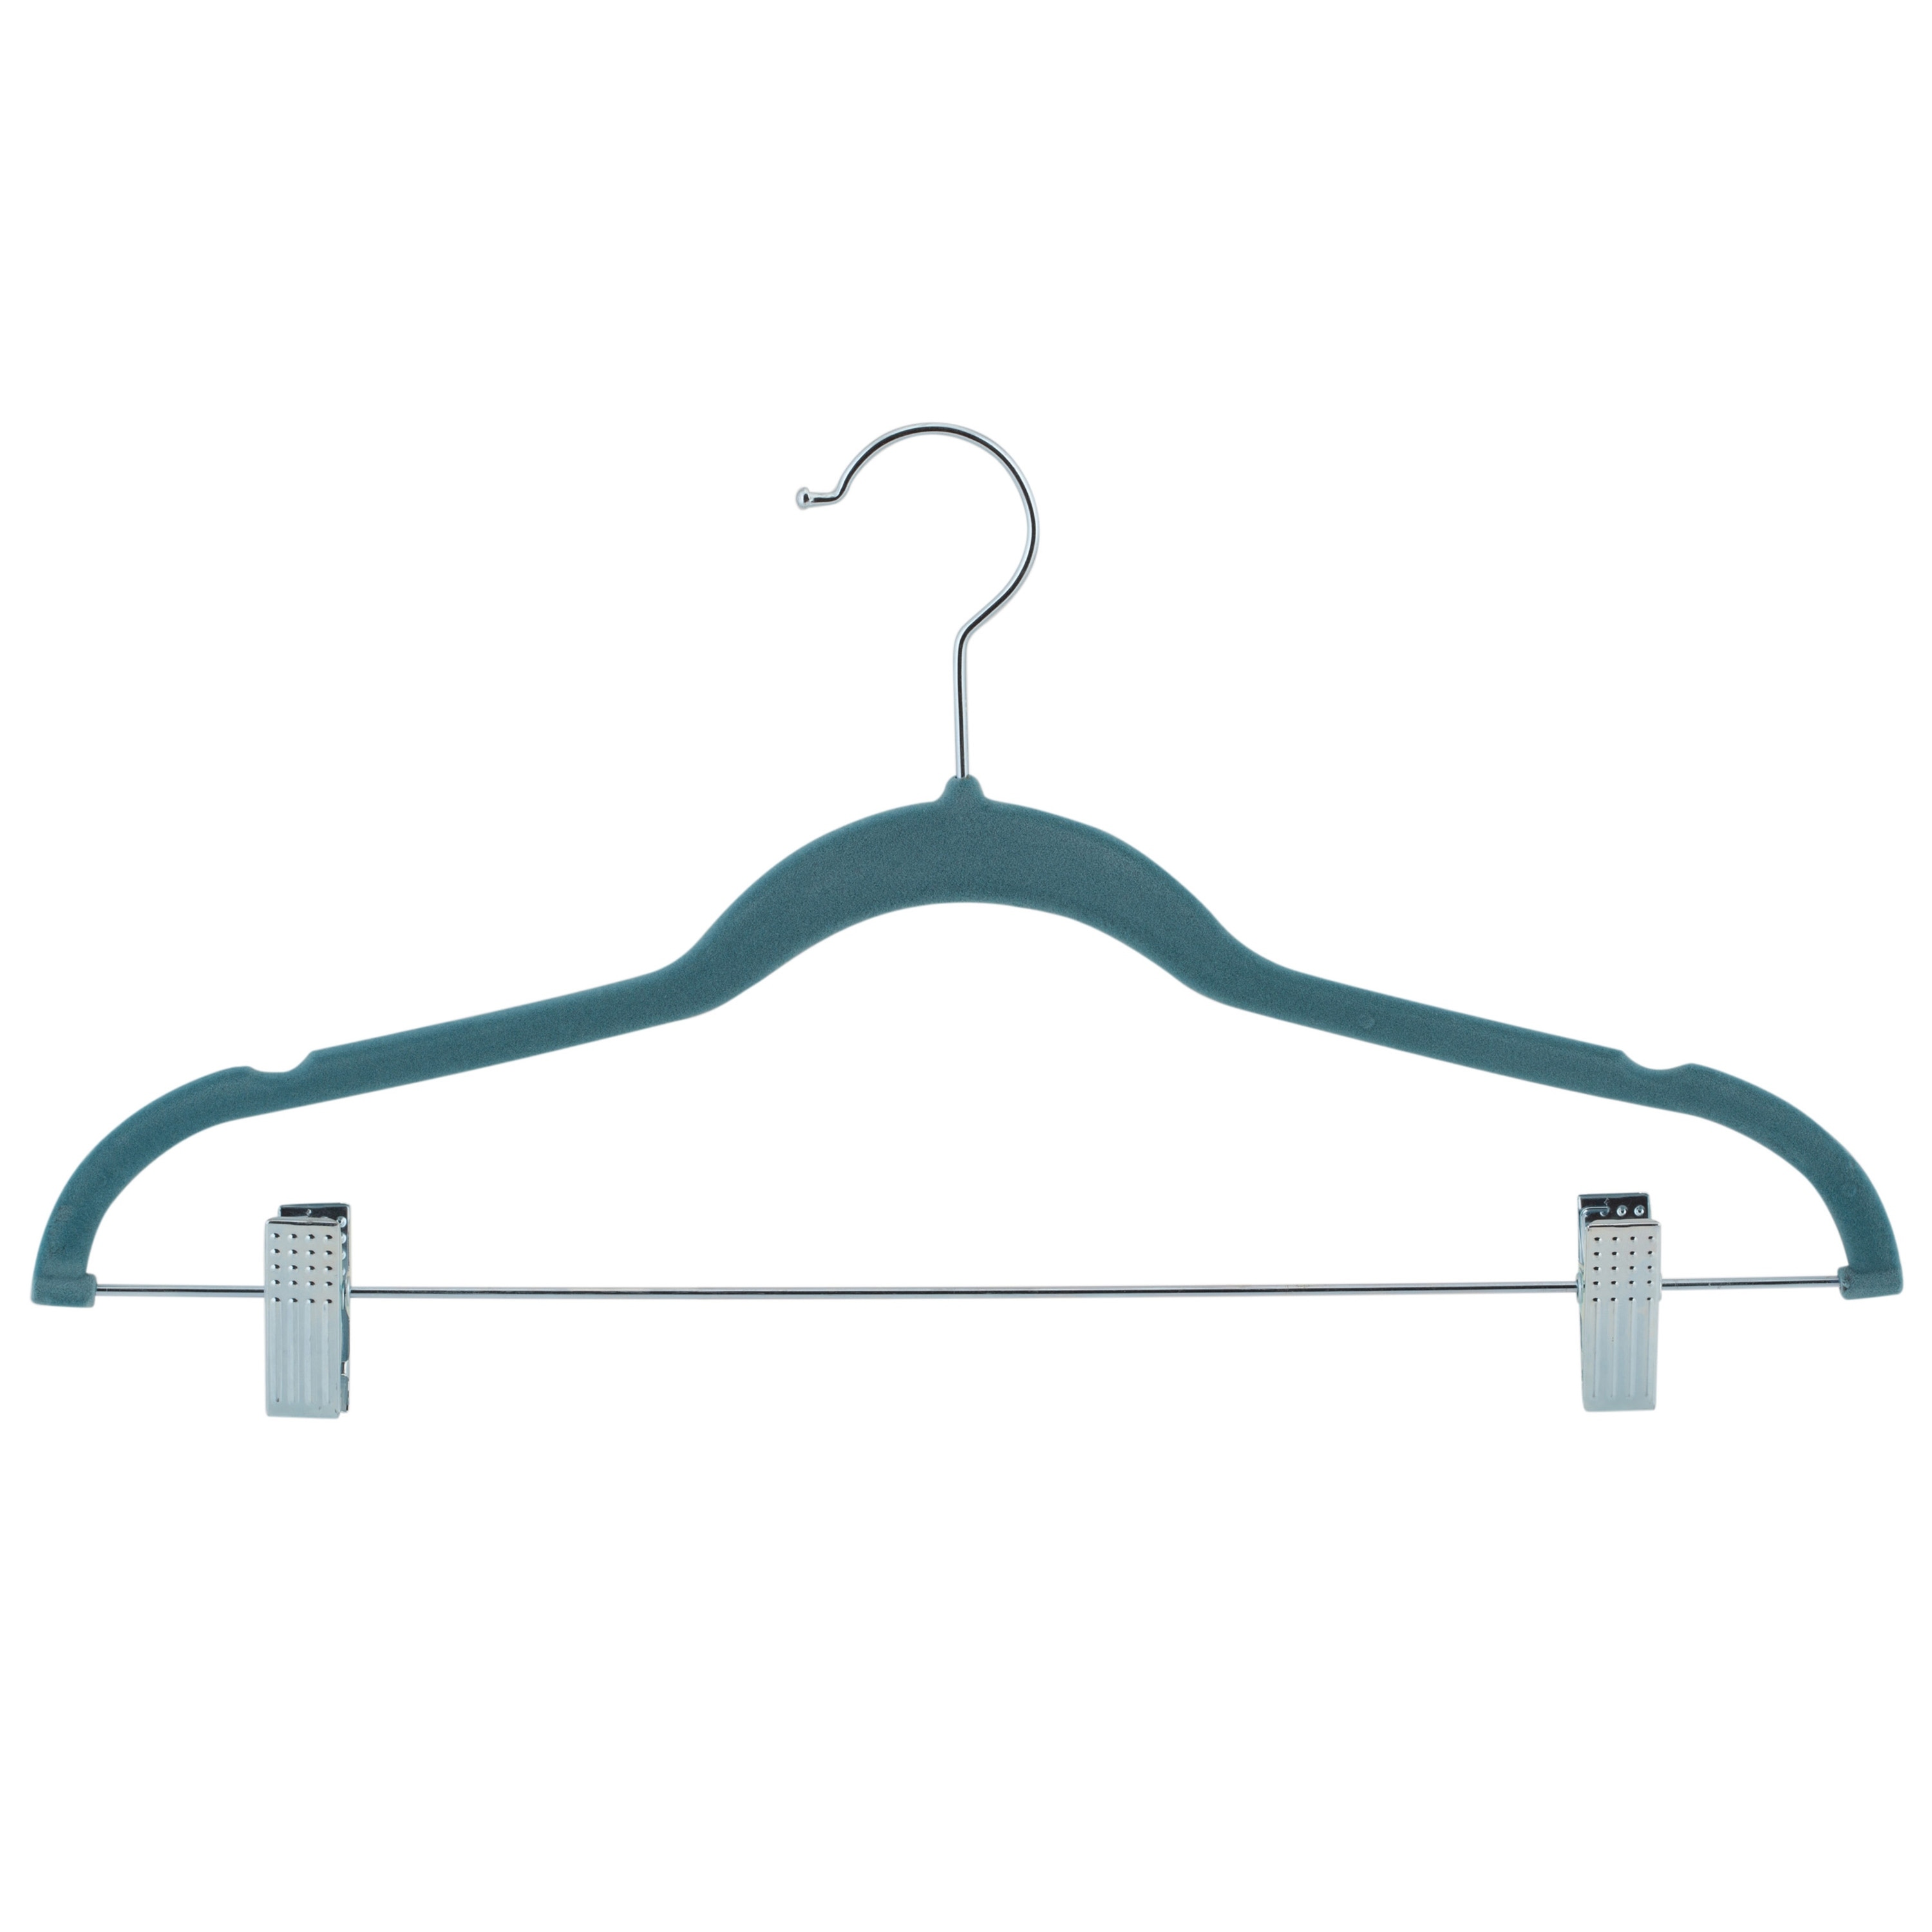 https://ak1.ostkcdn.com/images/products/is/images/direct/d2b59d653ef014c1fd84ddcd54e3f3278afb6f4f/Laura-Ashley-12-Pack-Velvet-Hangers-with-Clips.jpg